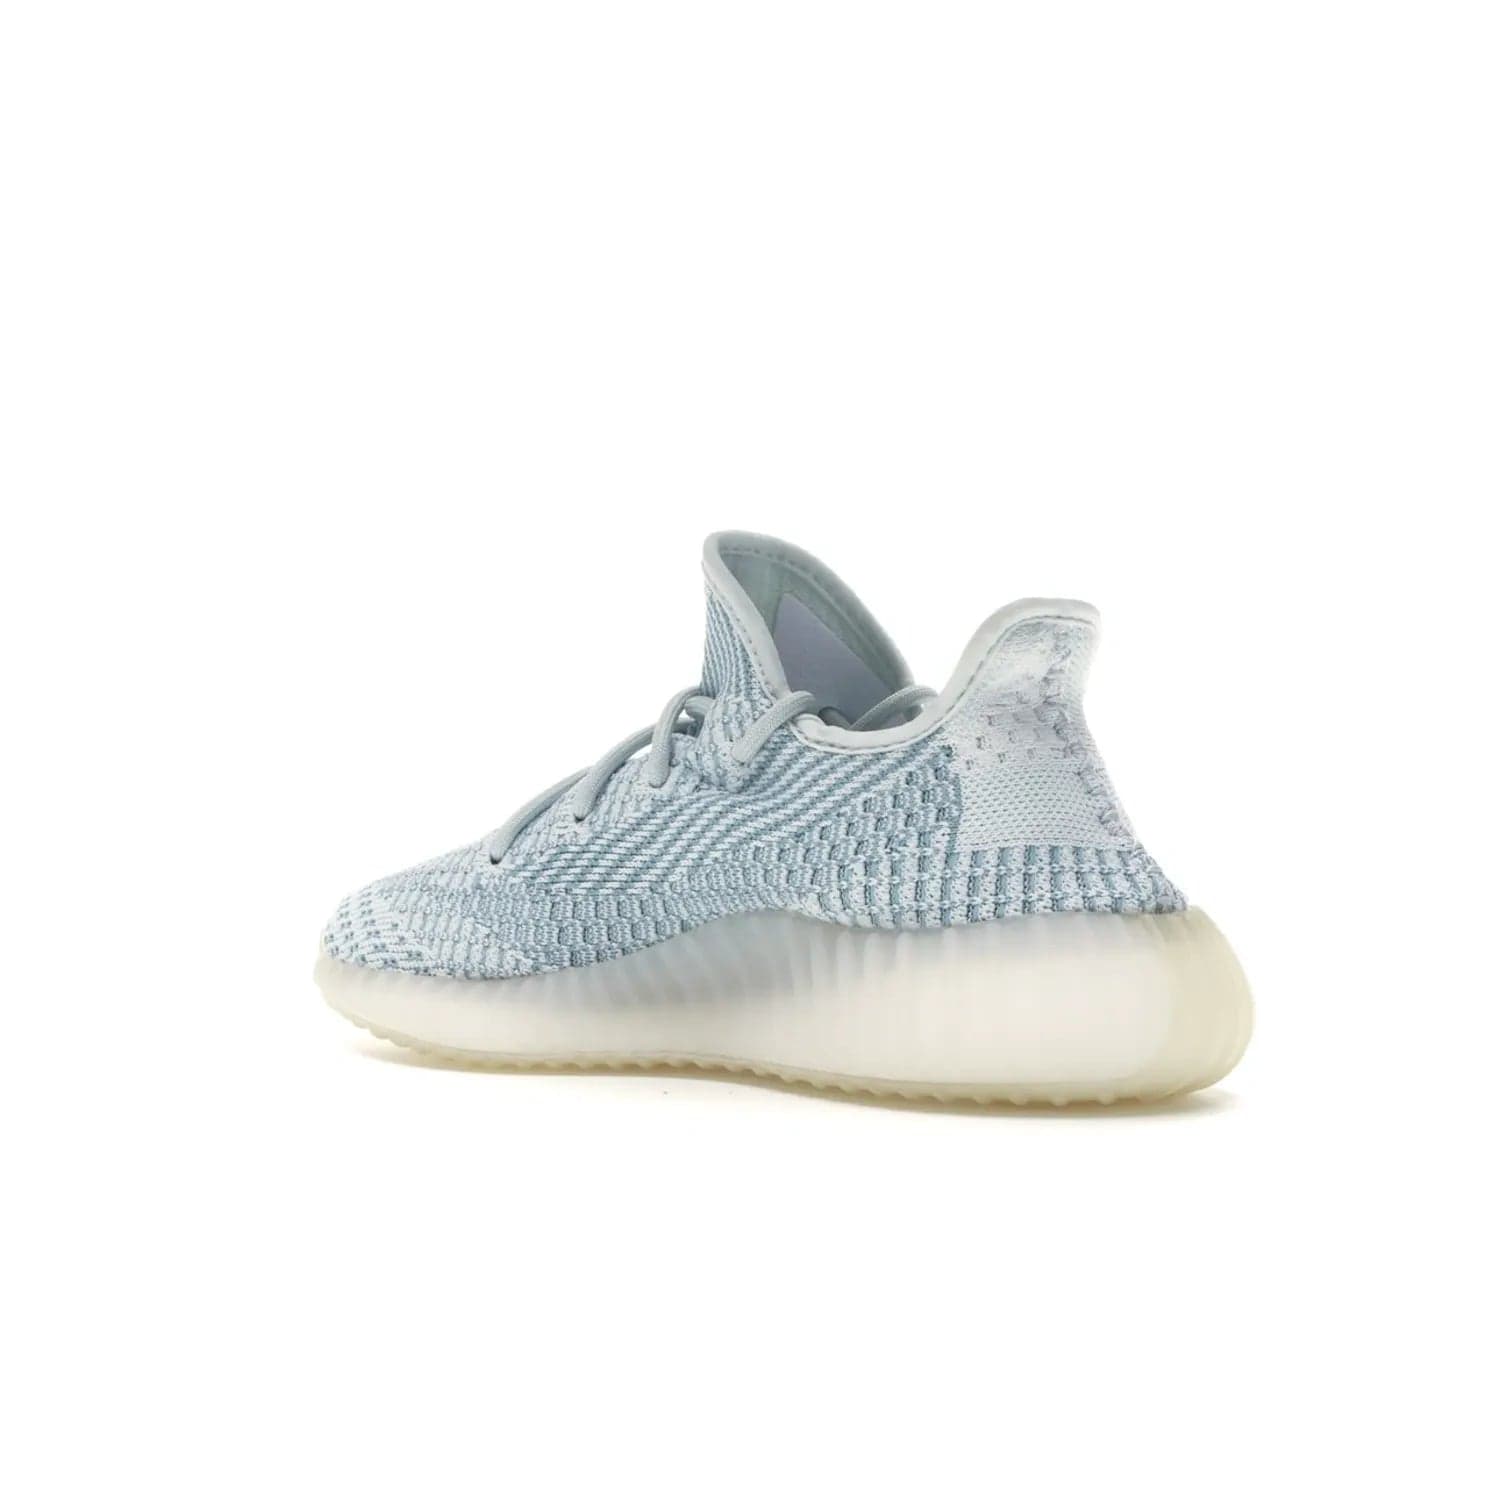 adidas Yeezy Boost 350 V2 Cloud White (Non-Reflective) - Image 23 - Only at www.BallersClubKickz.com - Uniquely designed adidas Yeezy Boost 350 V2 Cloud White (Non-Reflective) with a Primeknit upper in shades of cream and blue with a contrasting hard sole. A fashion-forward sneaker with a transparent strip and blue-and-white patterns.